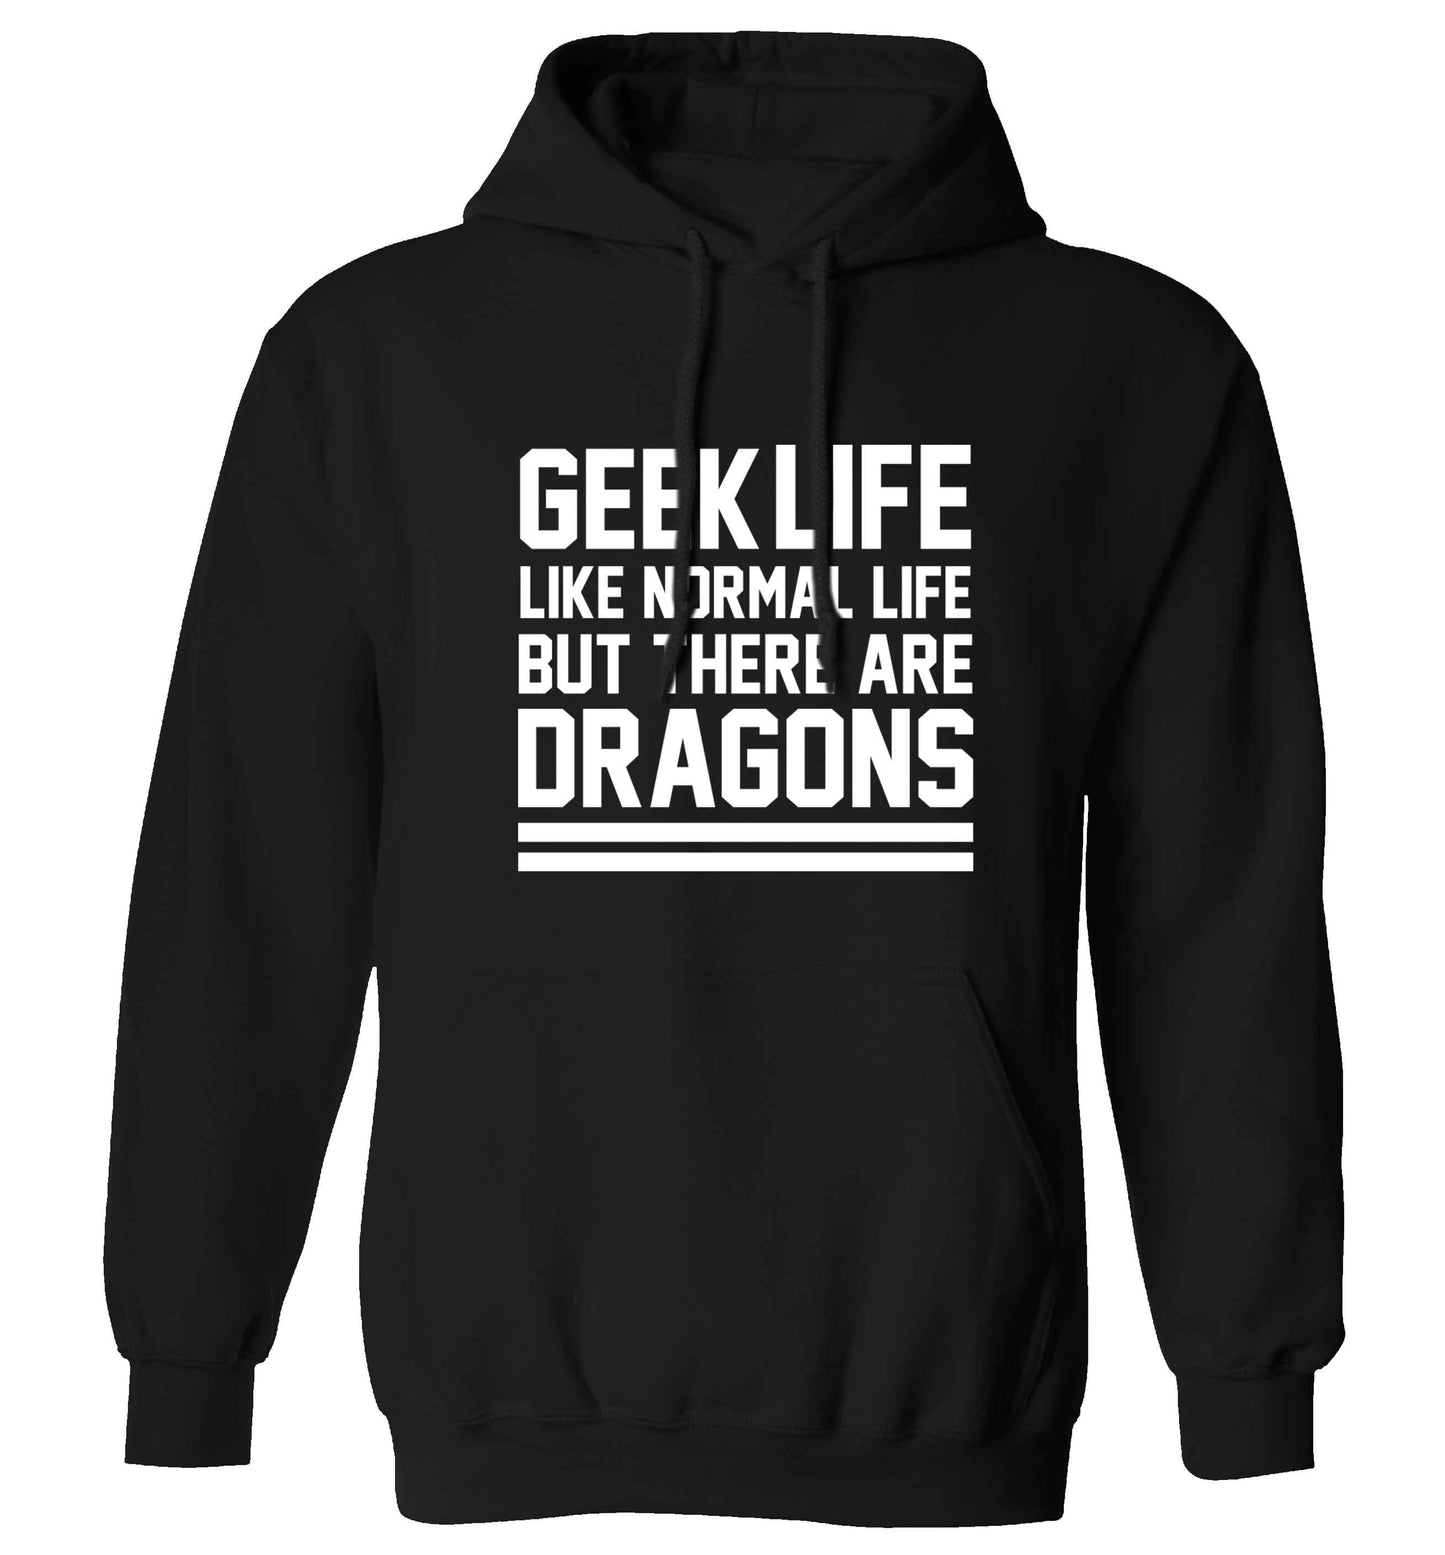 Geek life like normal life but there are dragons adults unisex black hoodie 2XL